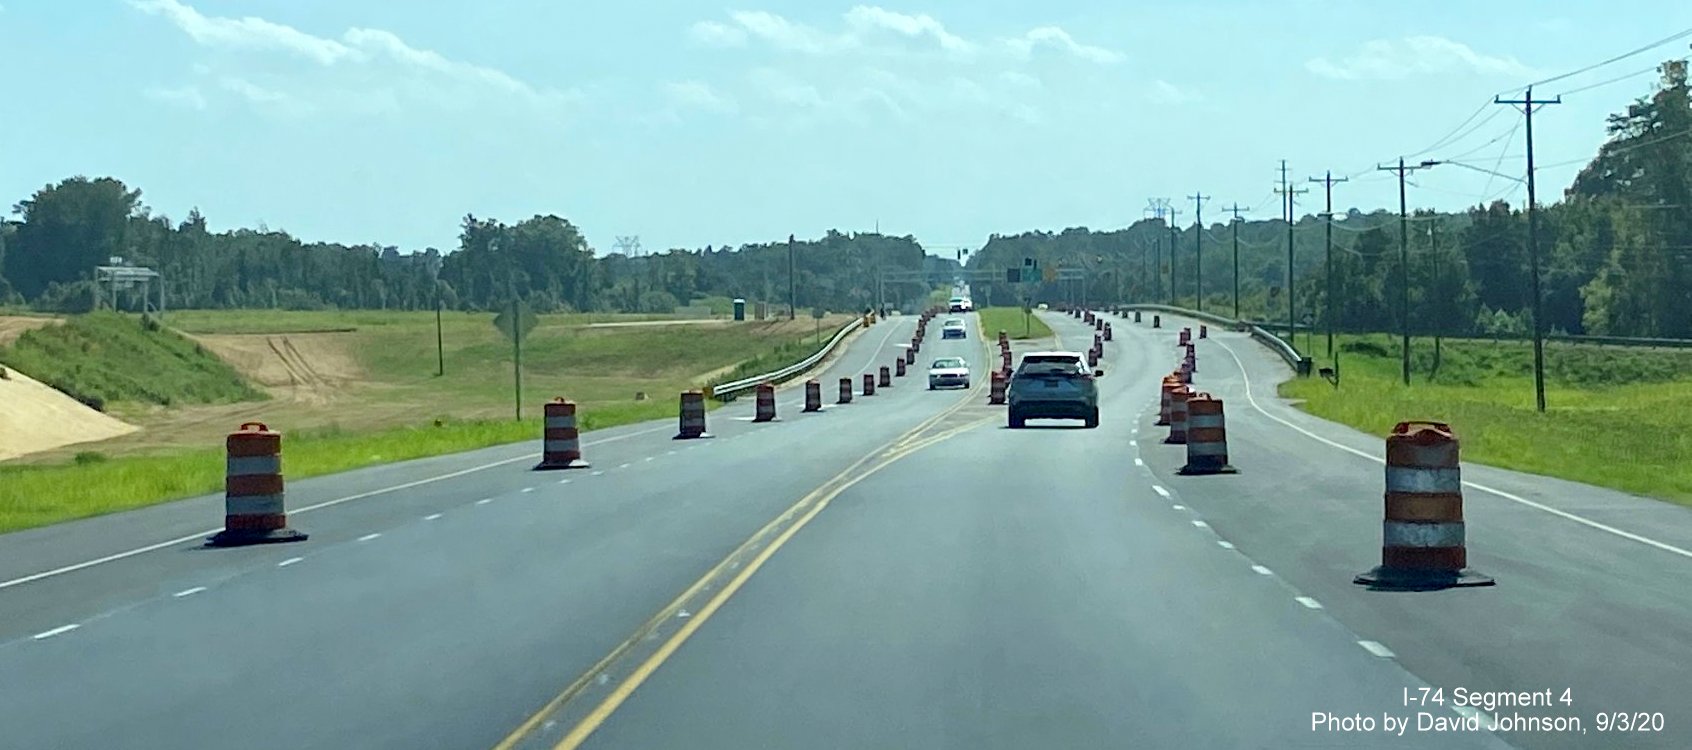 Image of US 158 West traffic restricted to one lane approaching soon to open interchange with NC 74 Winston-Salem Northern Beltway, by David Johnson September 2020